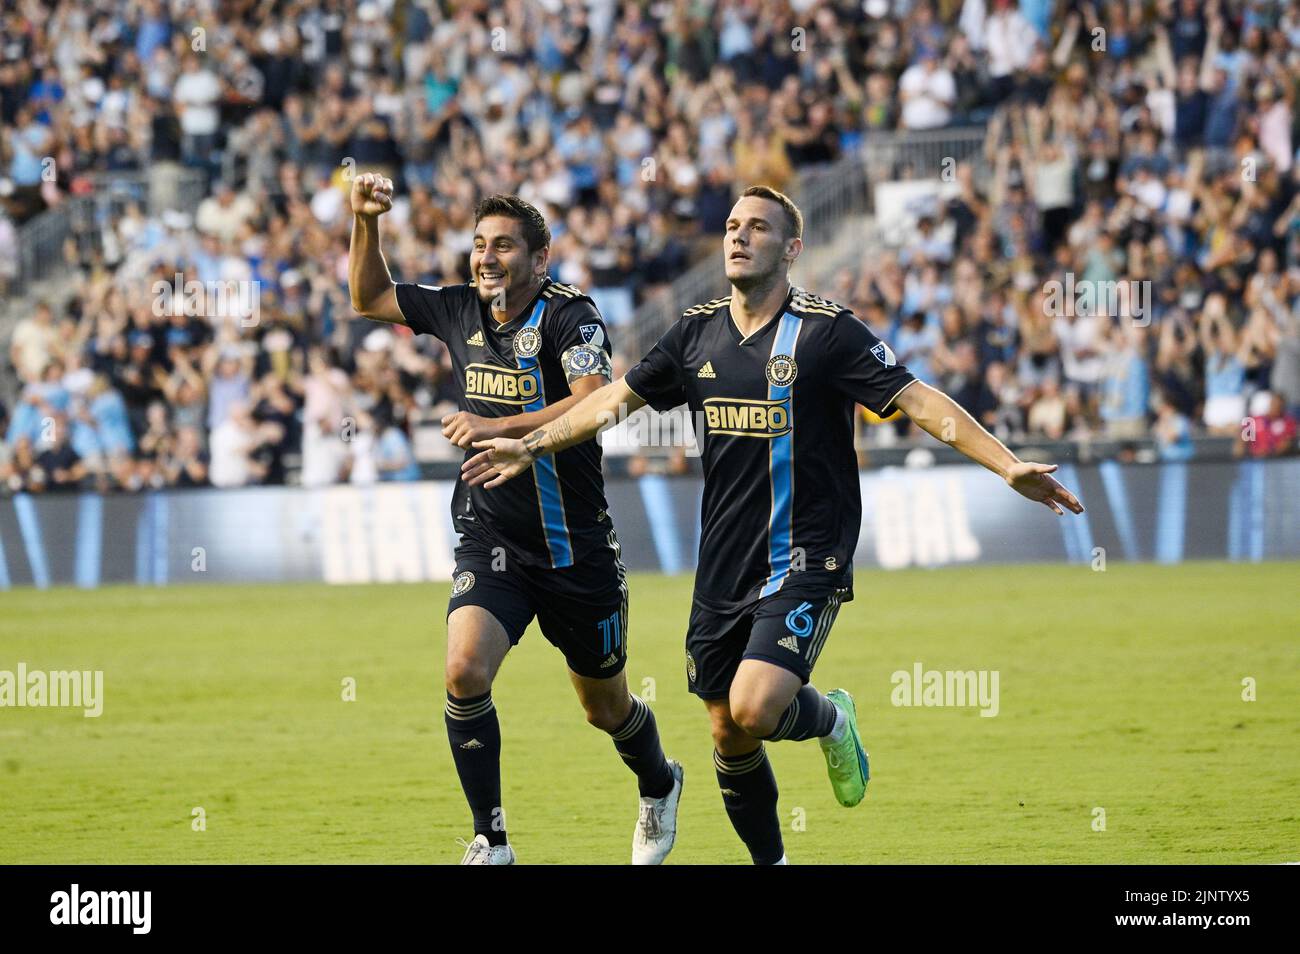 August 13, 2022: August13, 2022, Chester PA- Philadelphia Union players, DANIEL GAZDAG (6) ALEJANDRO BEDOYA (11) celebrate after Gazdag scored a goal during the match at Subaru Park in Chester PA (Credit Image: © Ricky Fitchett/ZUMA Press Wire) Stock Photo